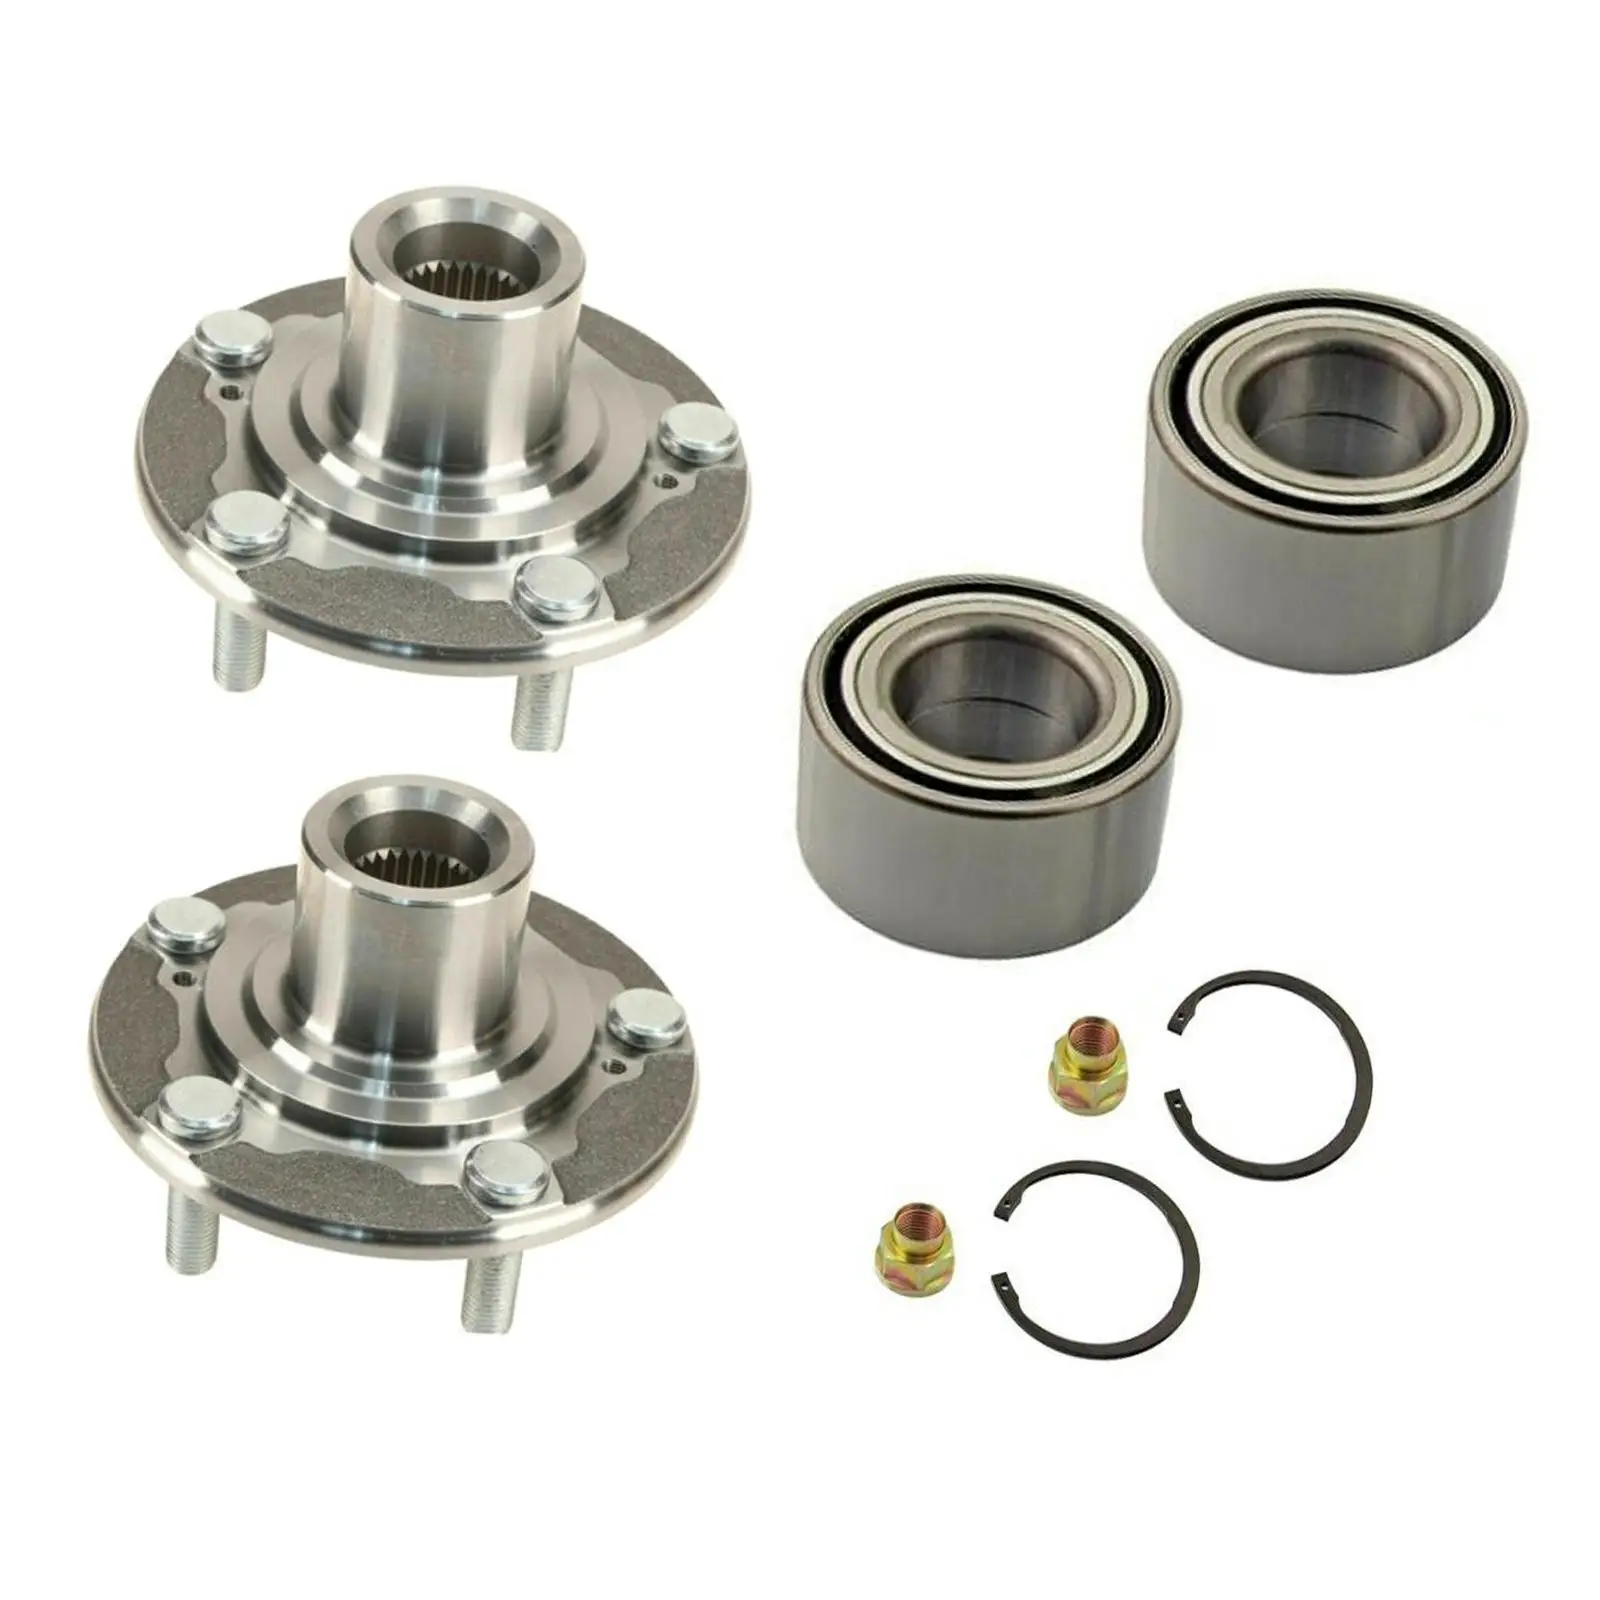 

2 Pieces Front Wheel Hub Bearing Kits Assembly Replaces with Retaining Clips Nuts Durable 44600-t2f-a01 for Honda Acura Tlx